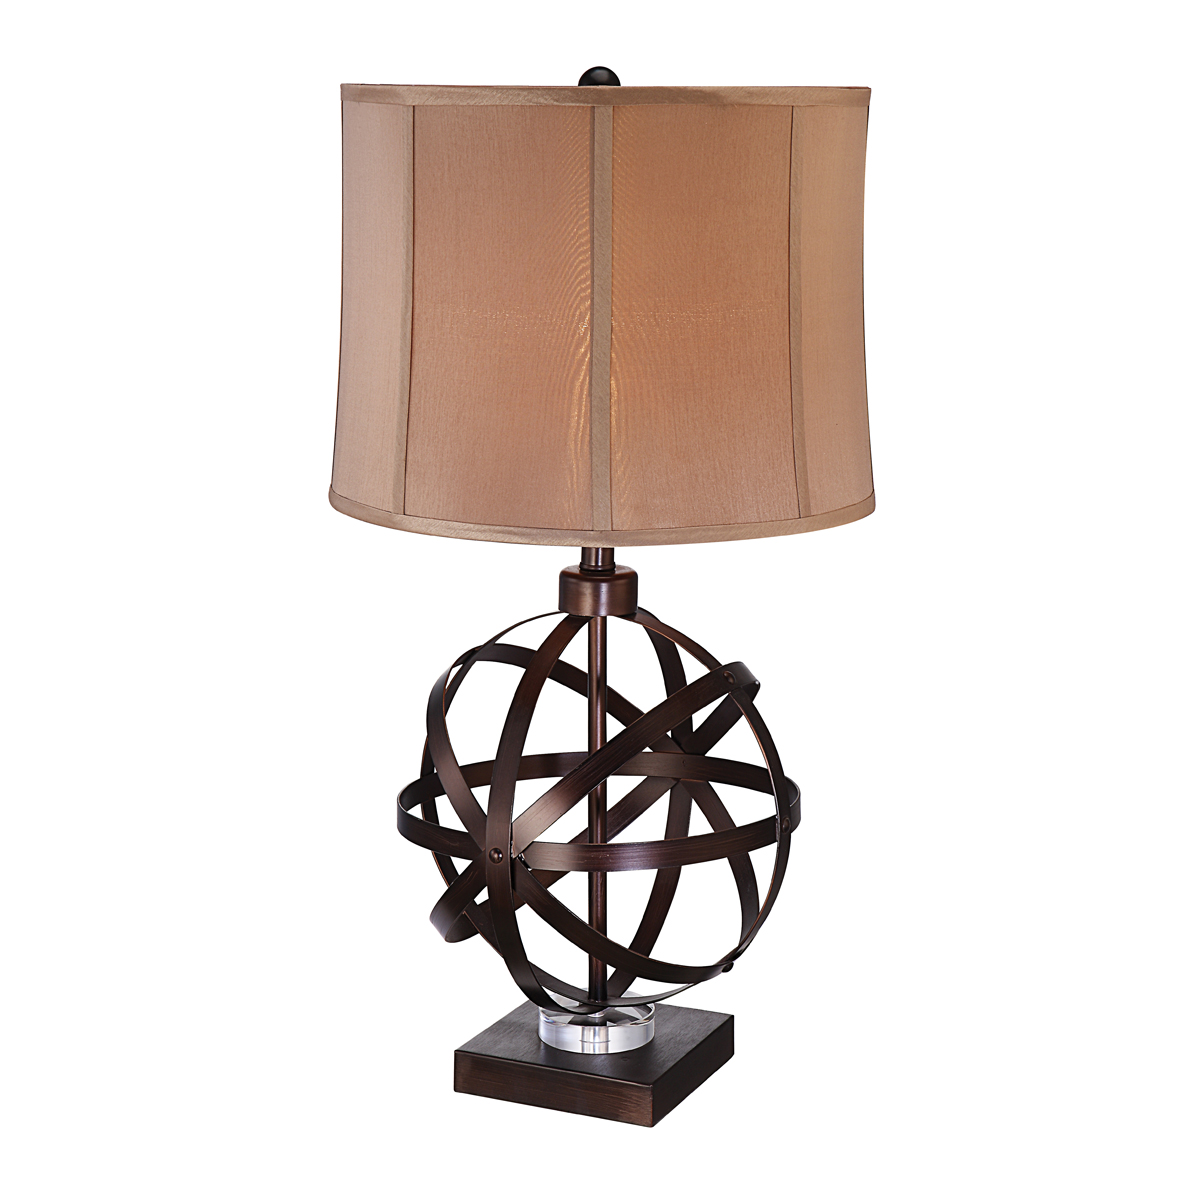 M3132ABZ Table lamp by anthony california inc